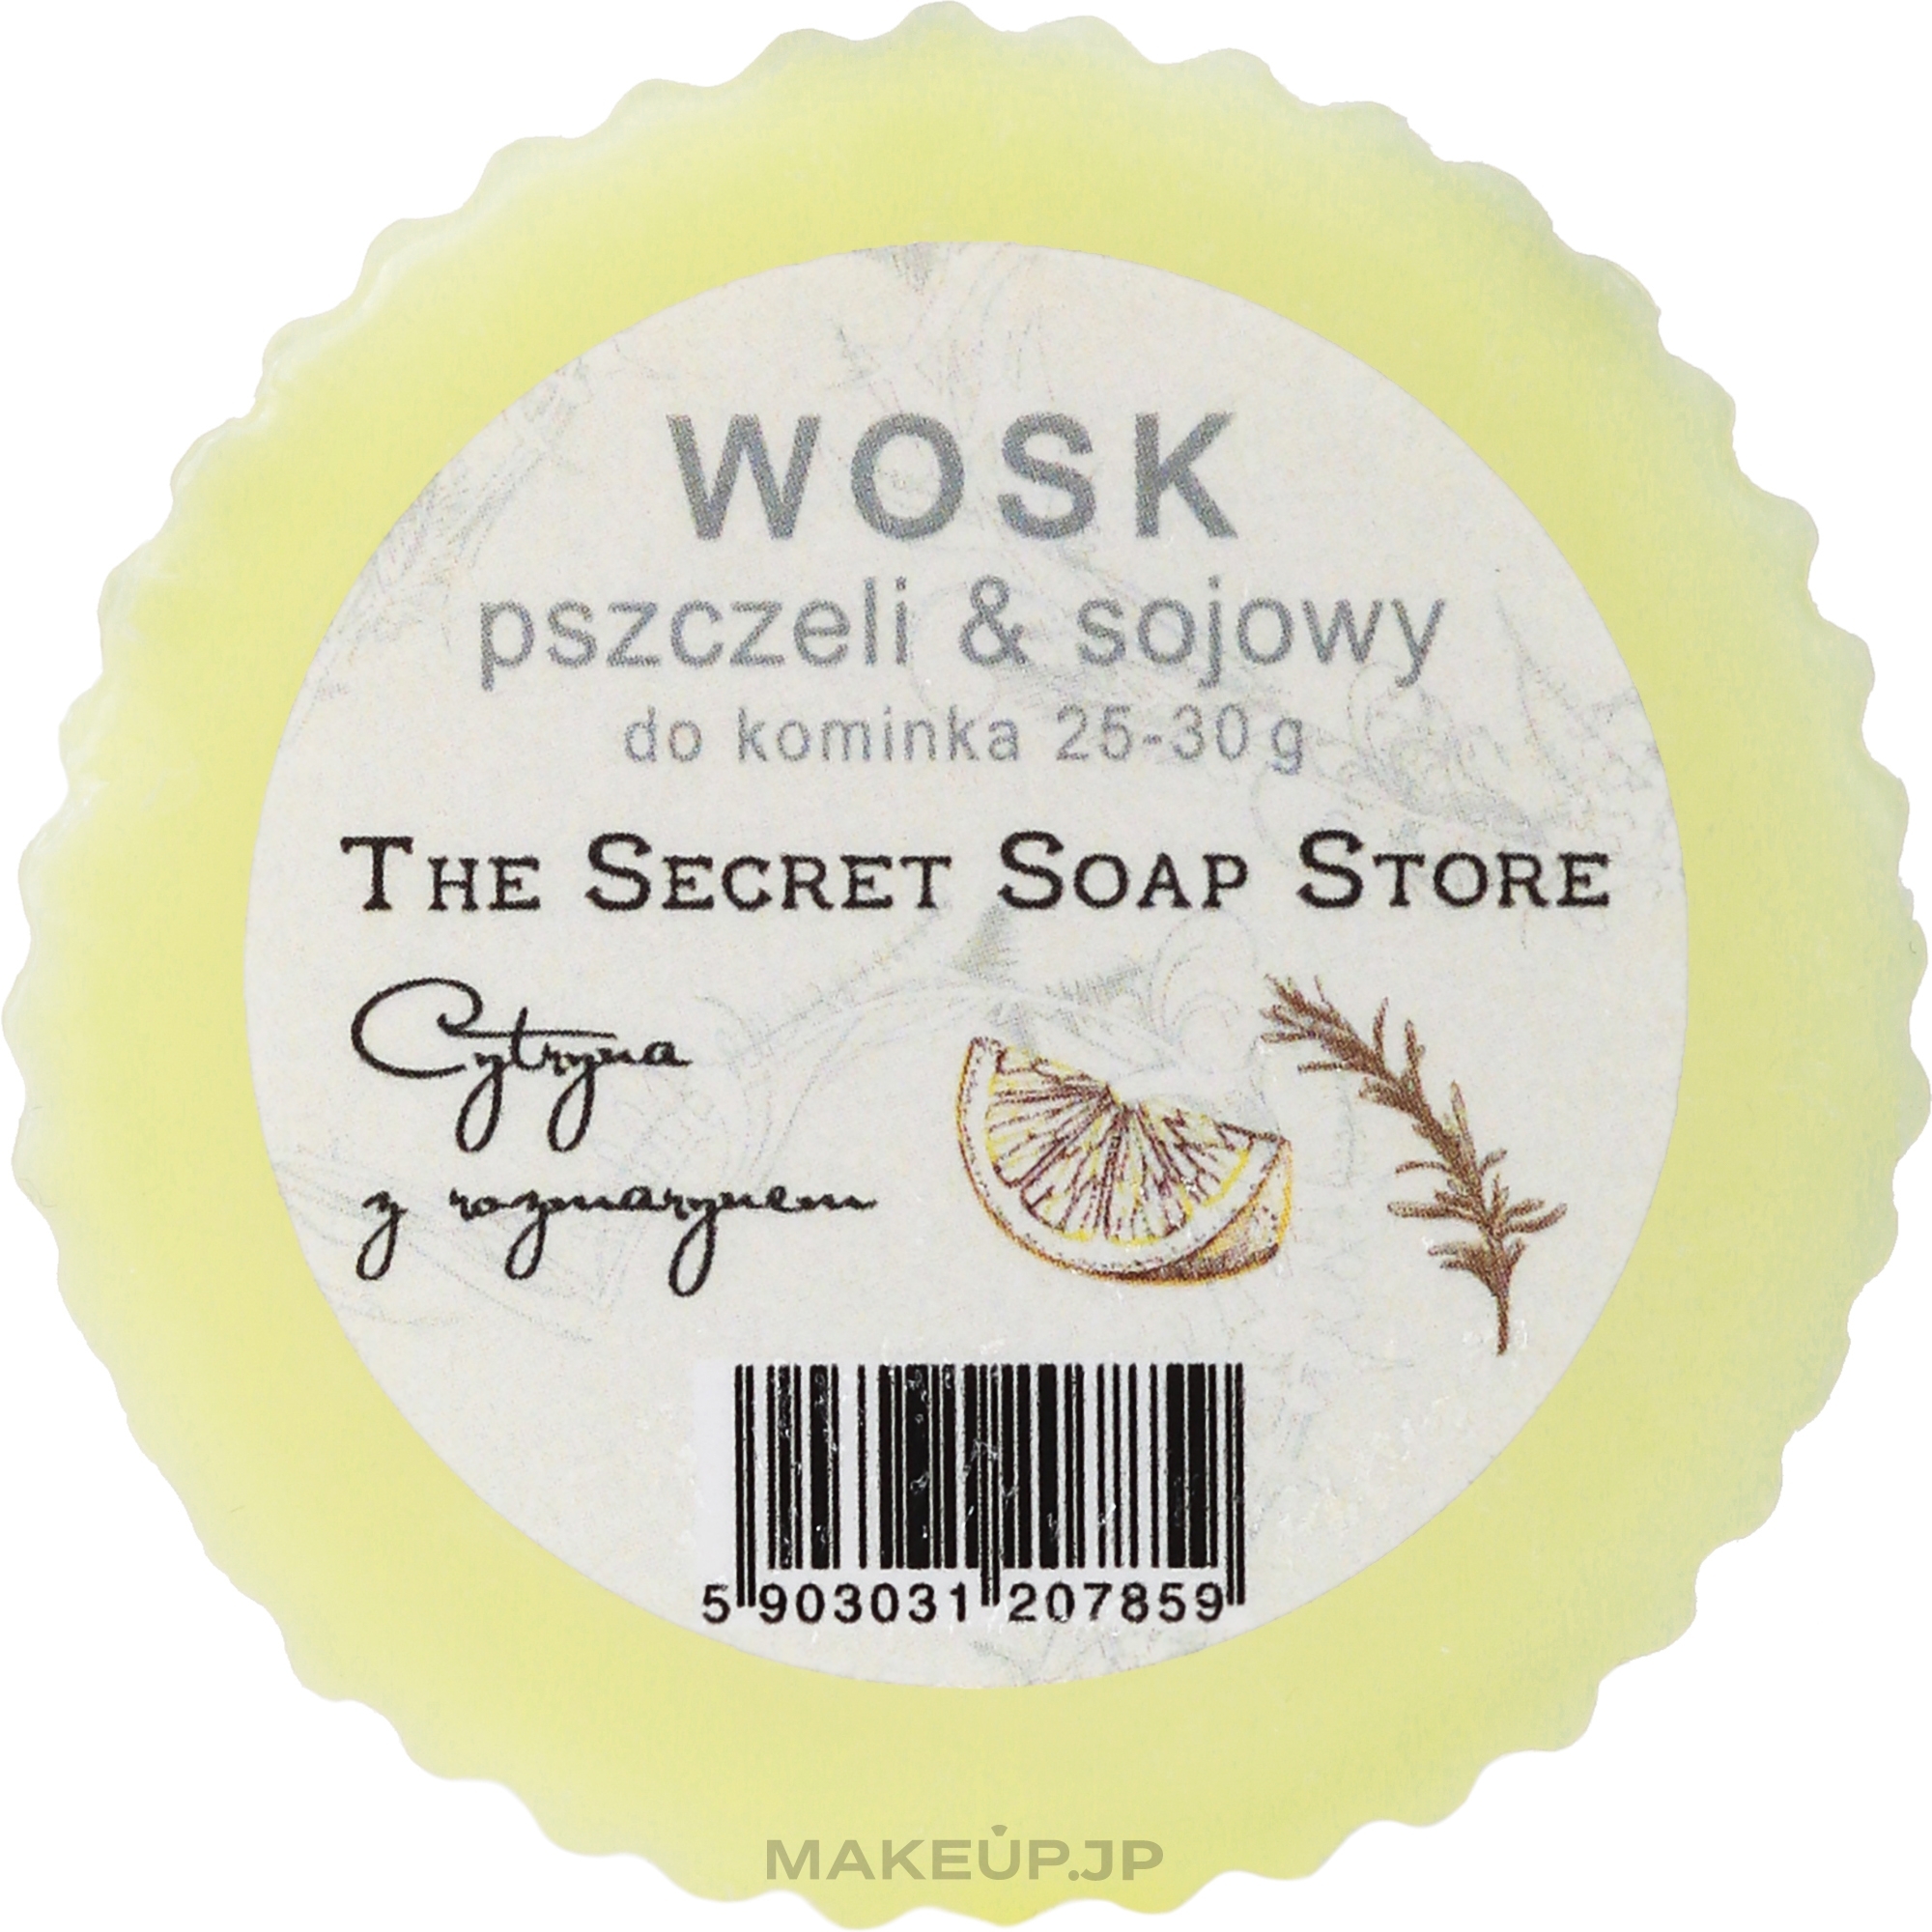 Lemon & Rosemary Scented Wax - Soap & Friends Wox Lemon With Rosemary — photo 25 g